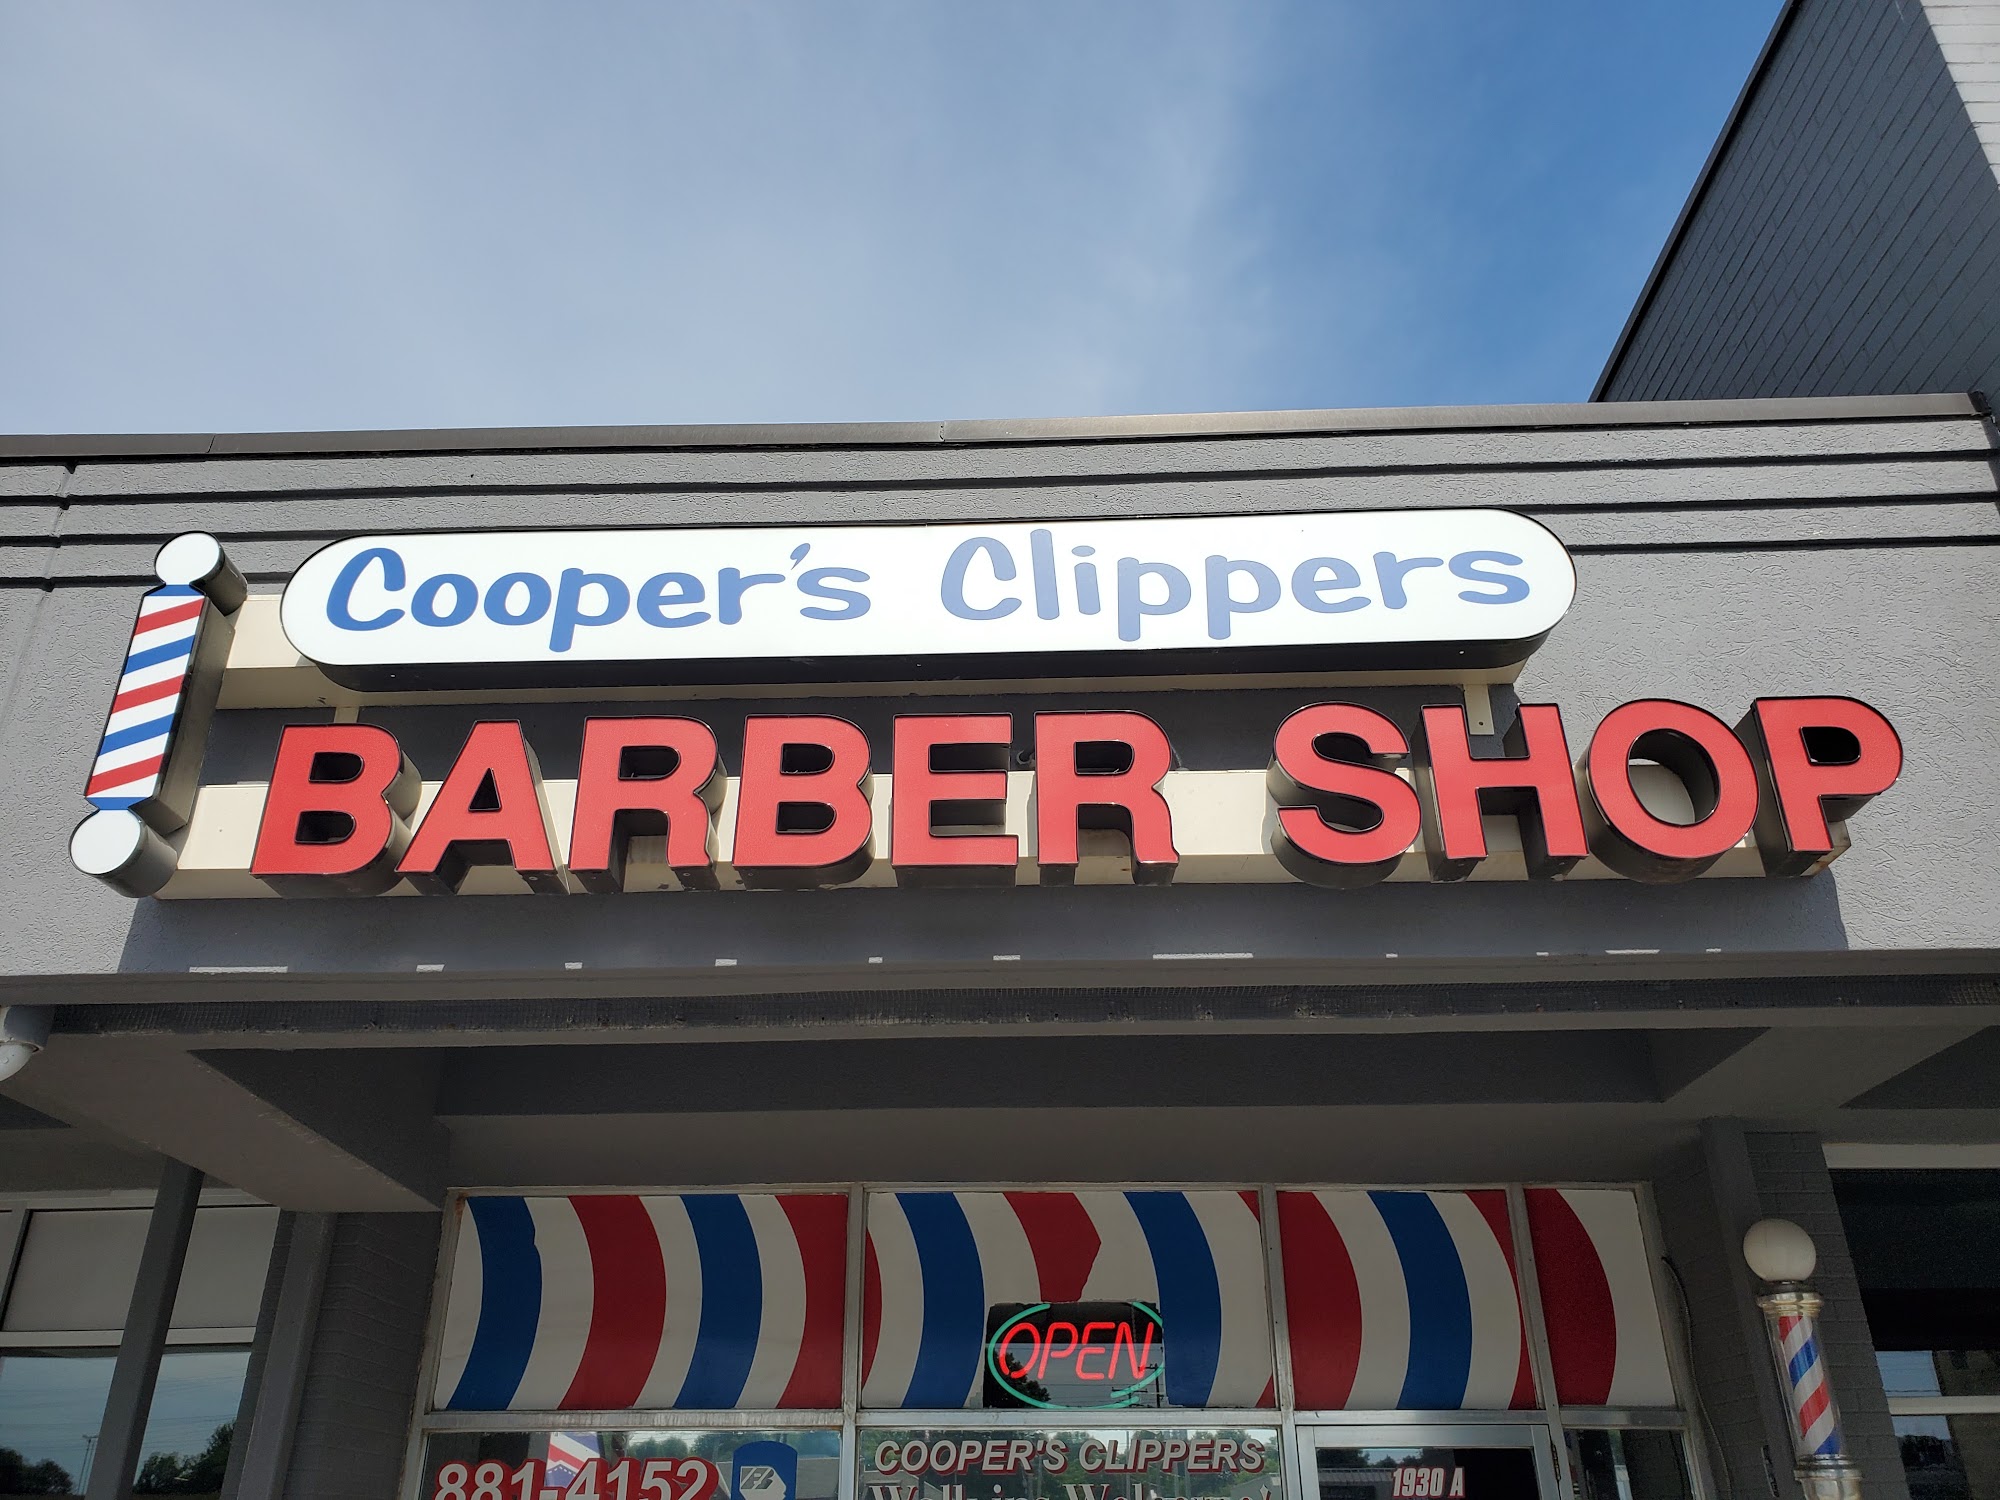 Cooper's Clippers